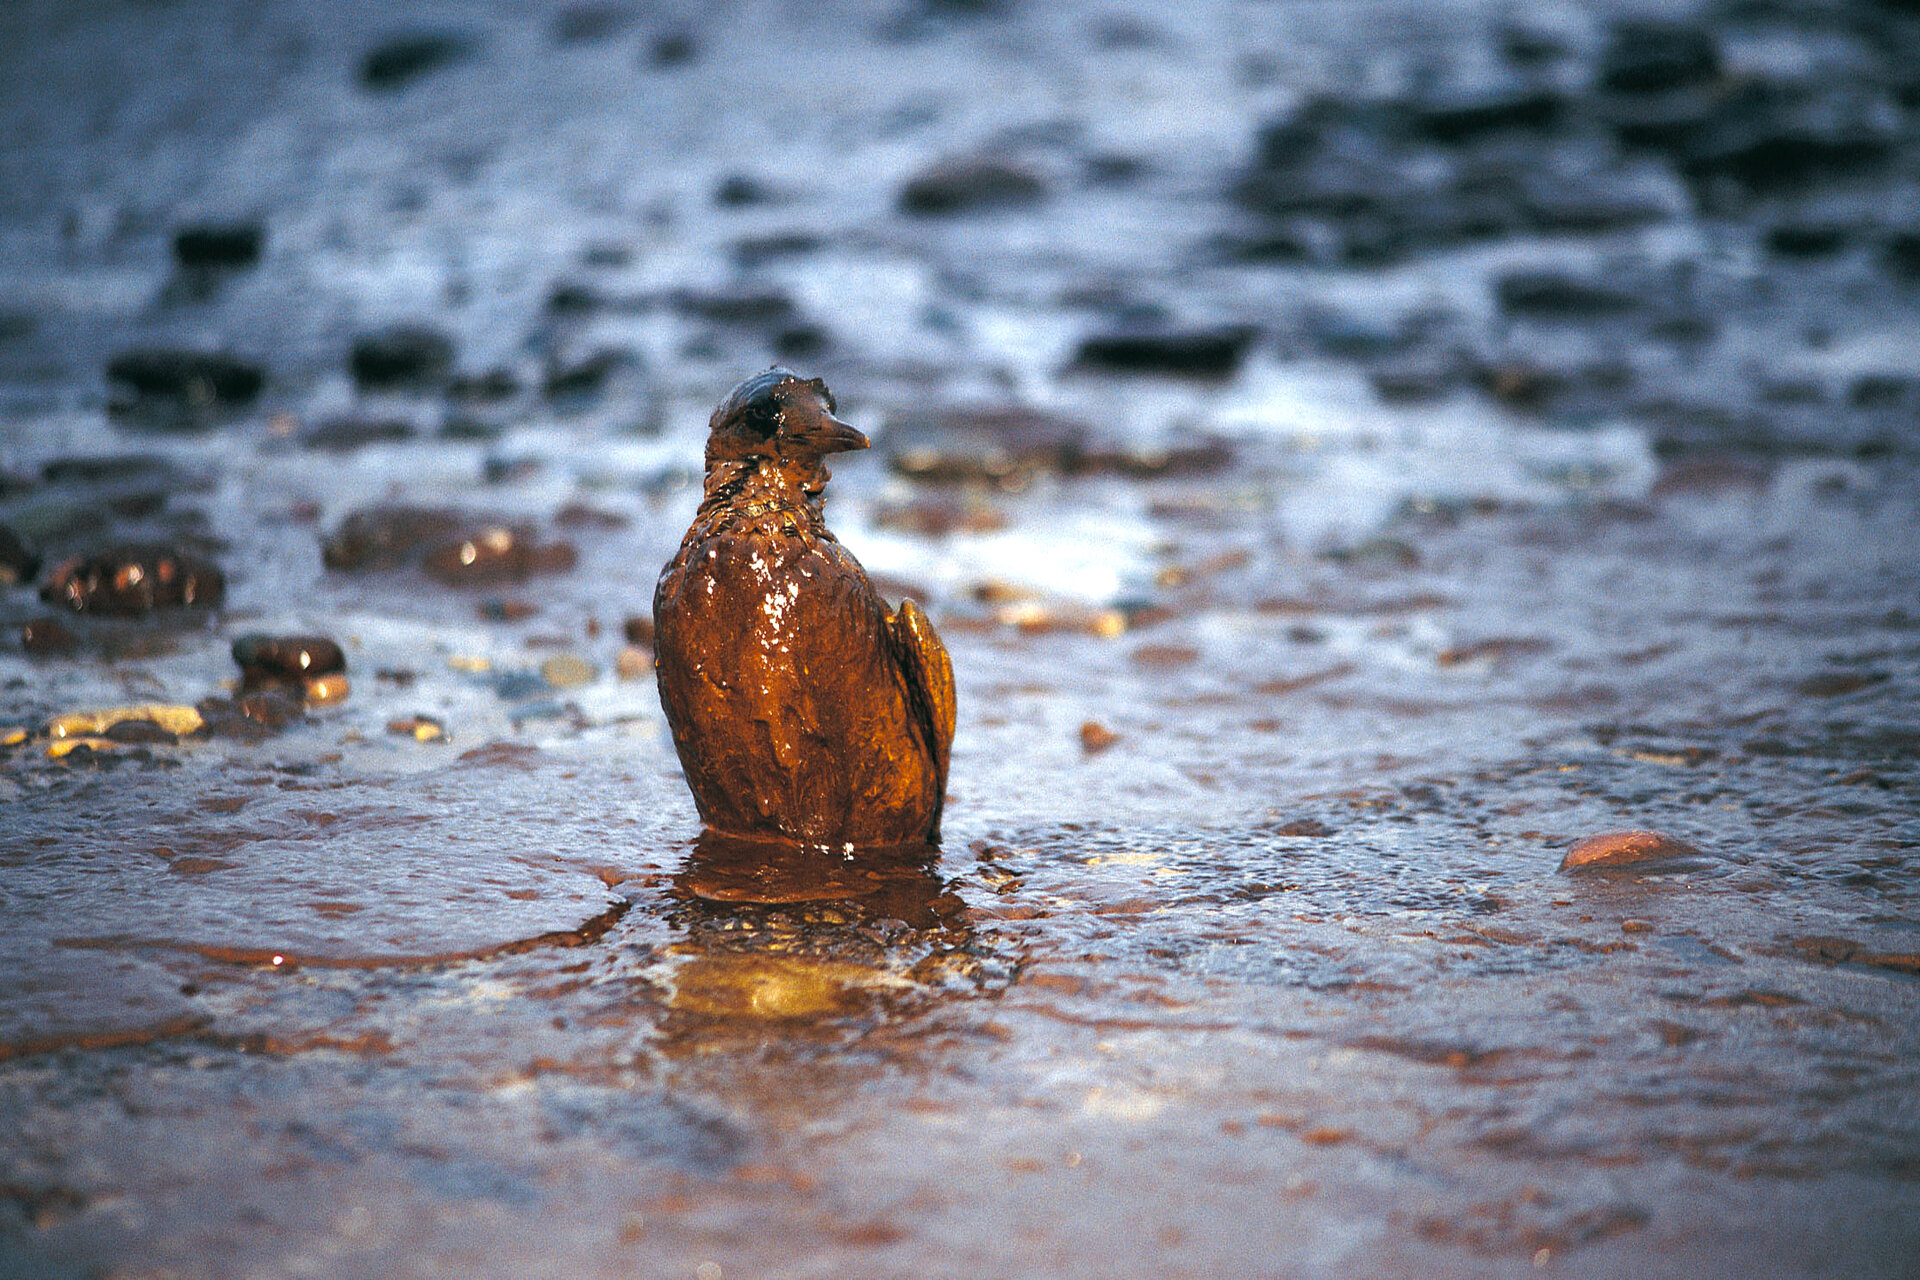 Oil spills can affect wildlife on land and at sea